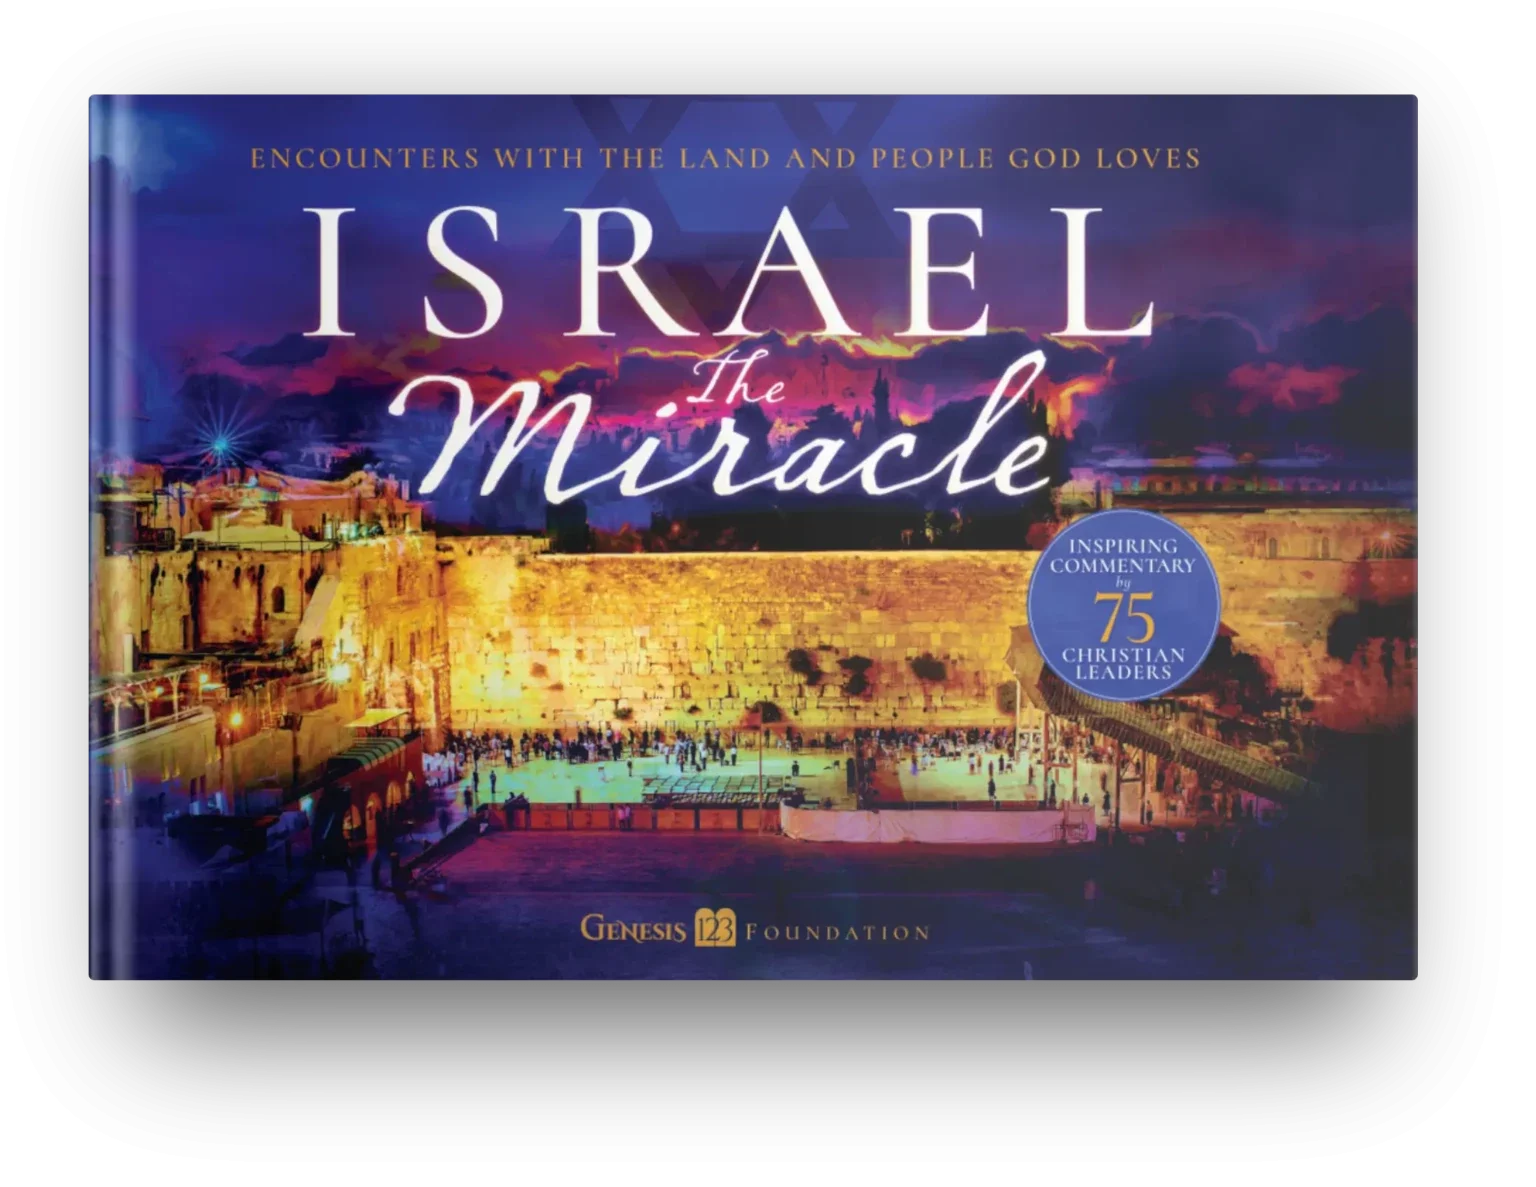 Israel the Miracle the book